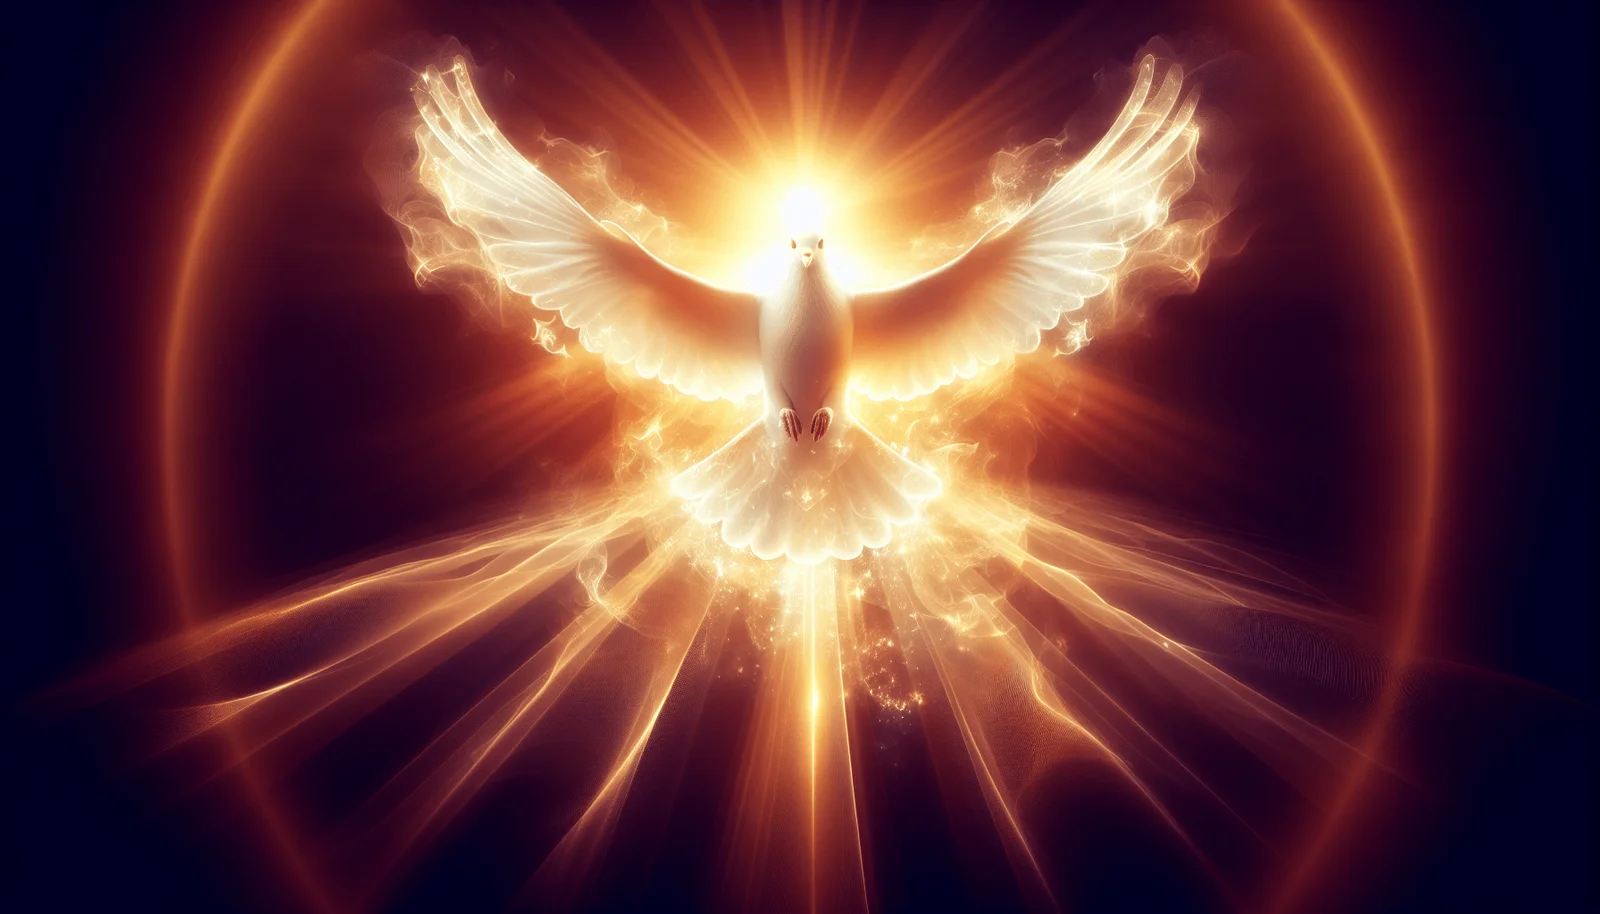 Finding Guidance Through The Holy Spirit.